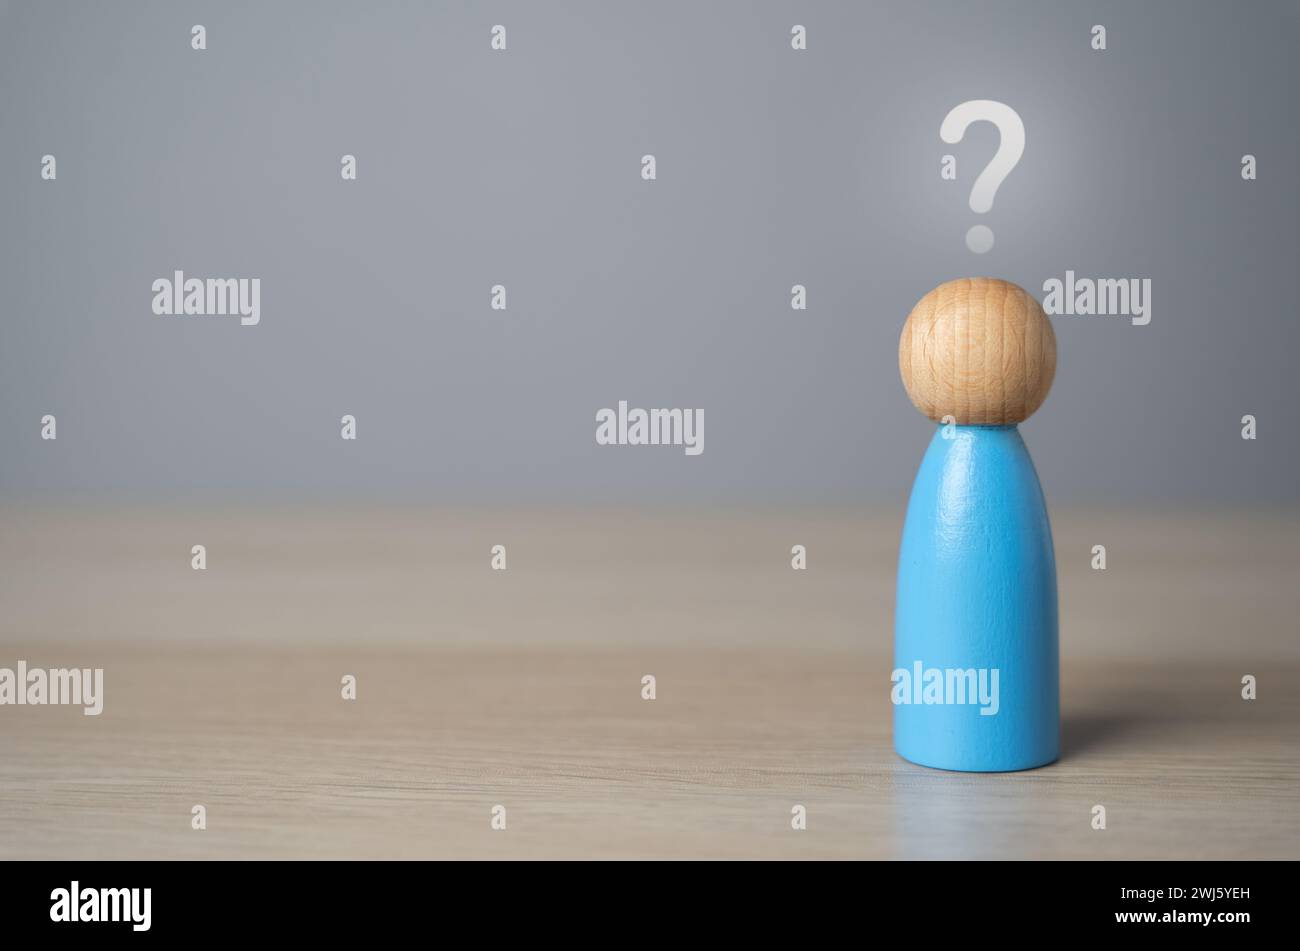 Man figurine with a question mark above his head. FAQ. Thoughts, reasoning and dreams. Introspection, asking yourself questions. Make plans and life g Stock Photo